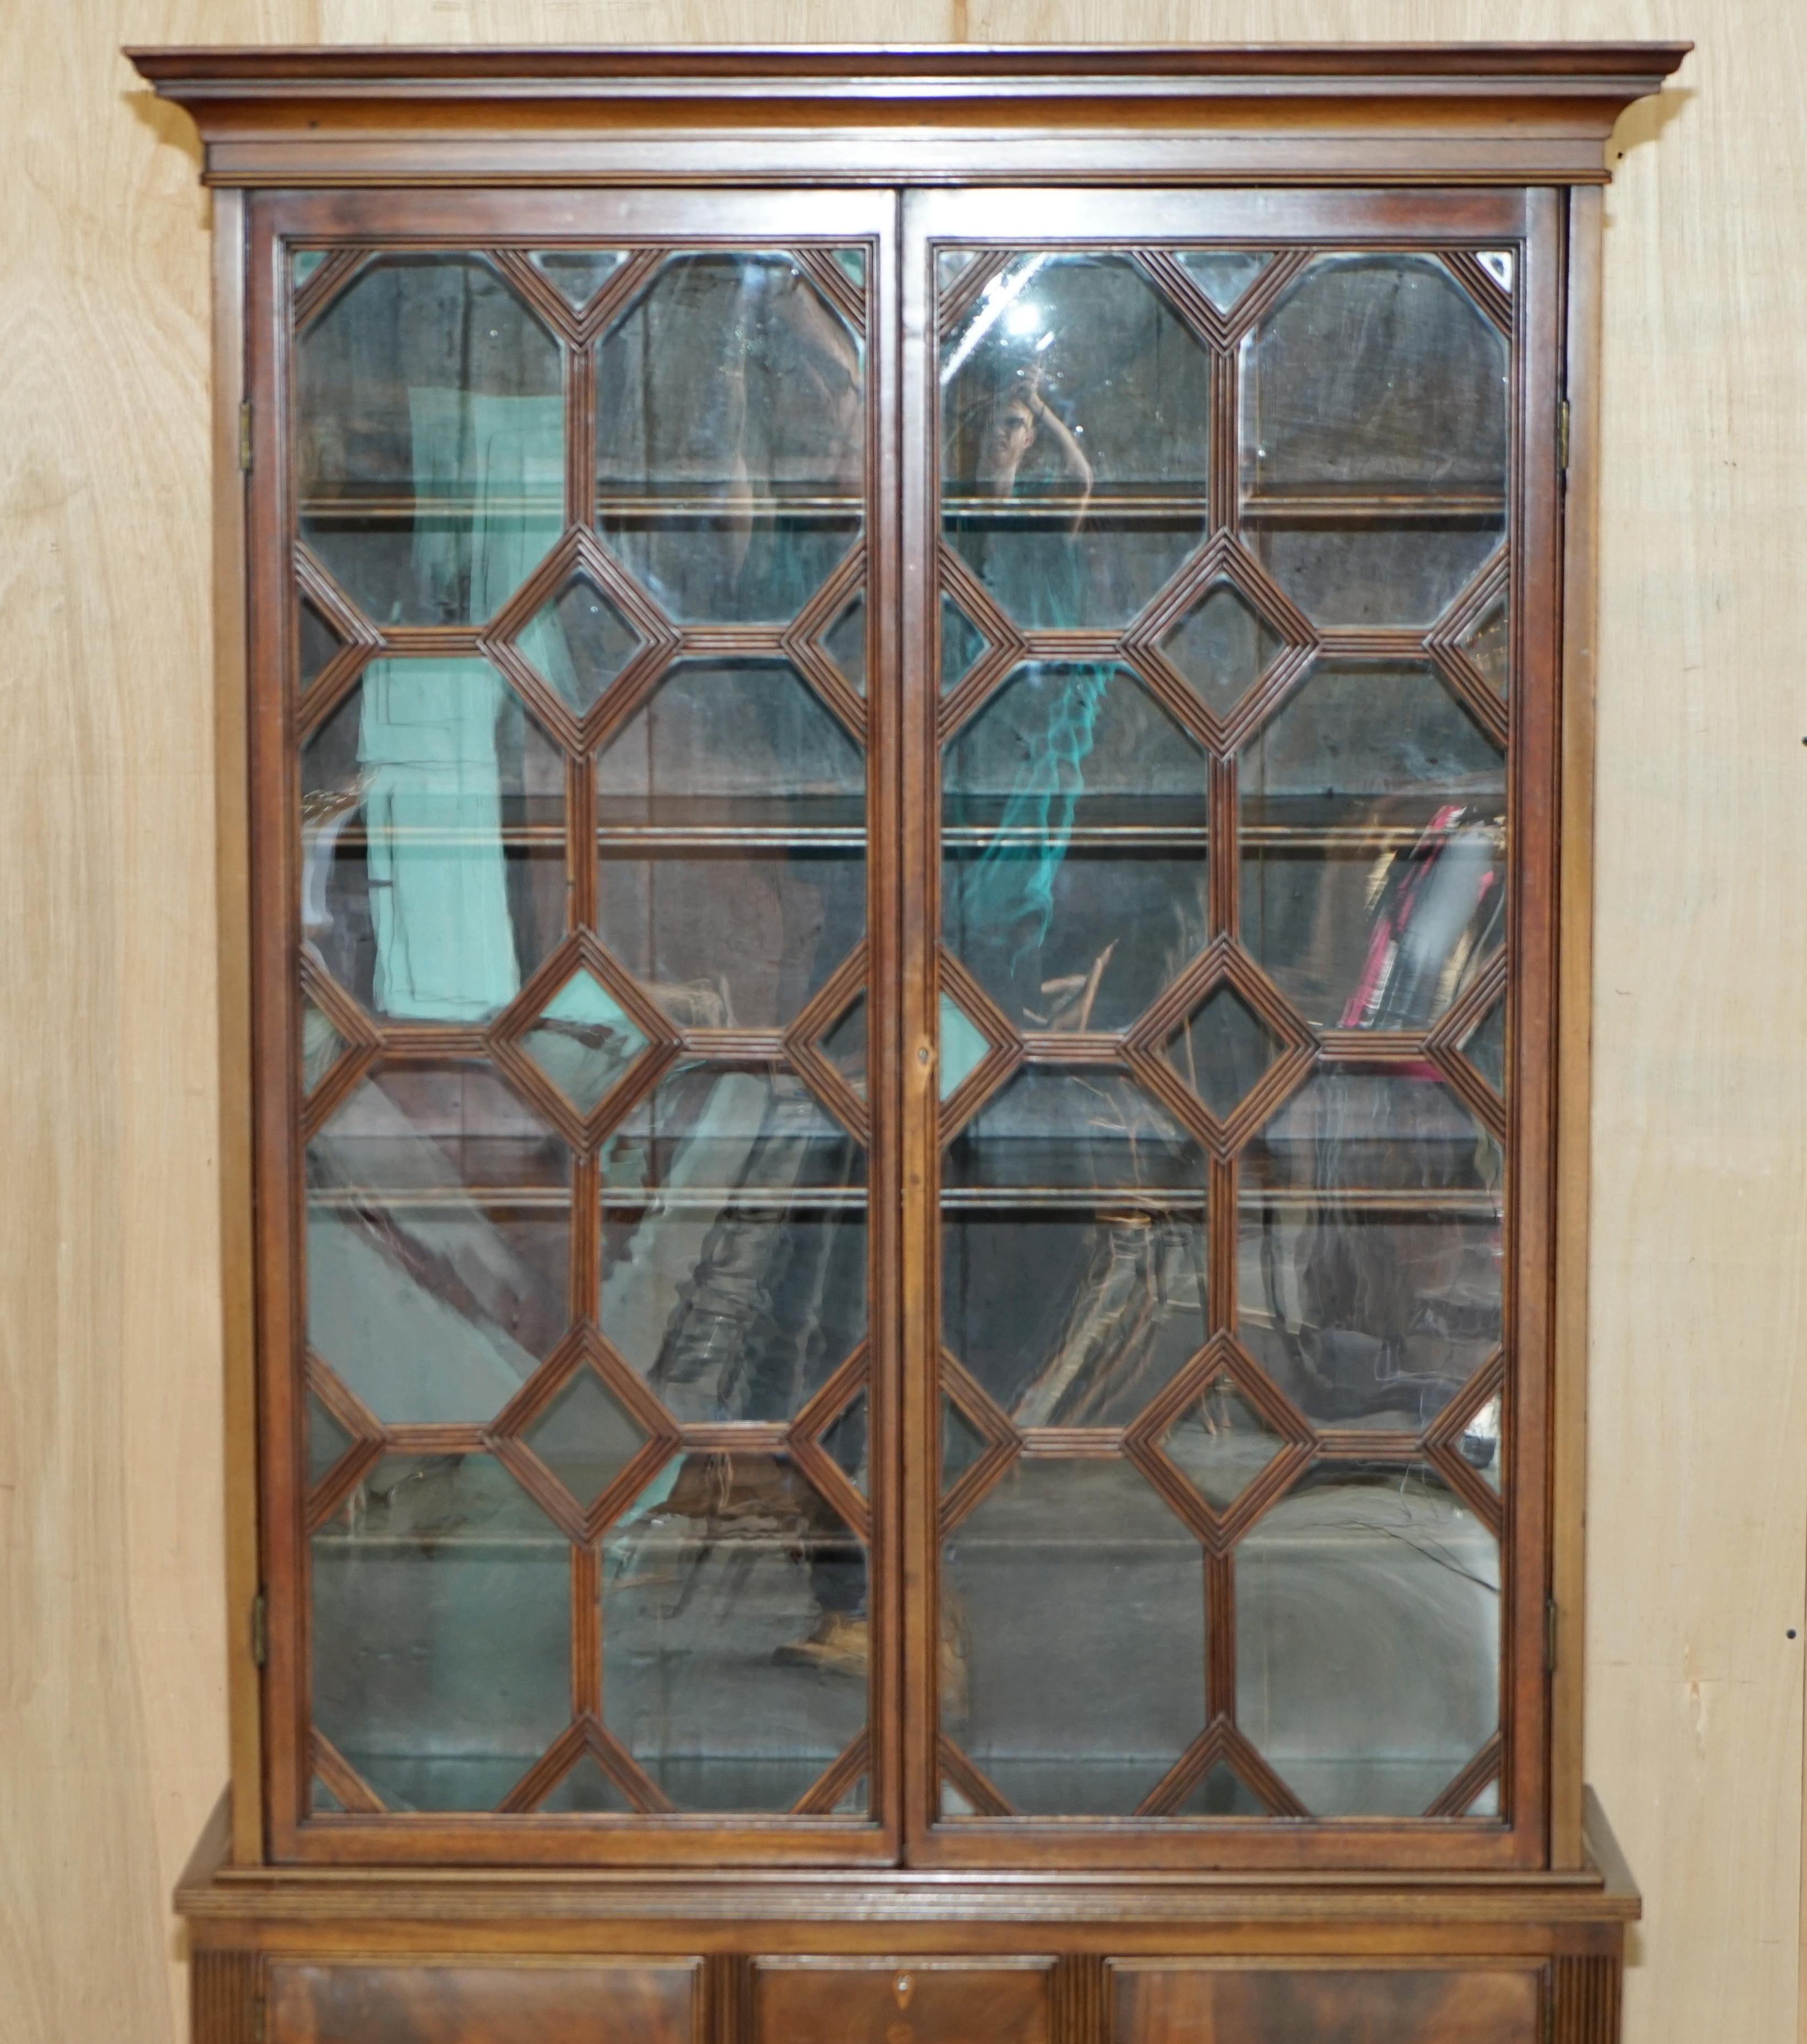 High Victorian ELEGANT ANTIQUE VICTORIAN CIRCA 1870 ASTRAL GLAZED BOOKCASE WiTH LONG LEGS For Sale